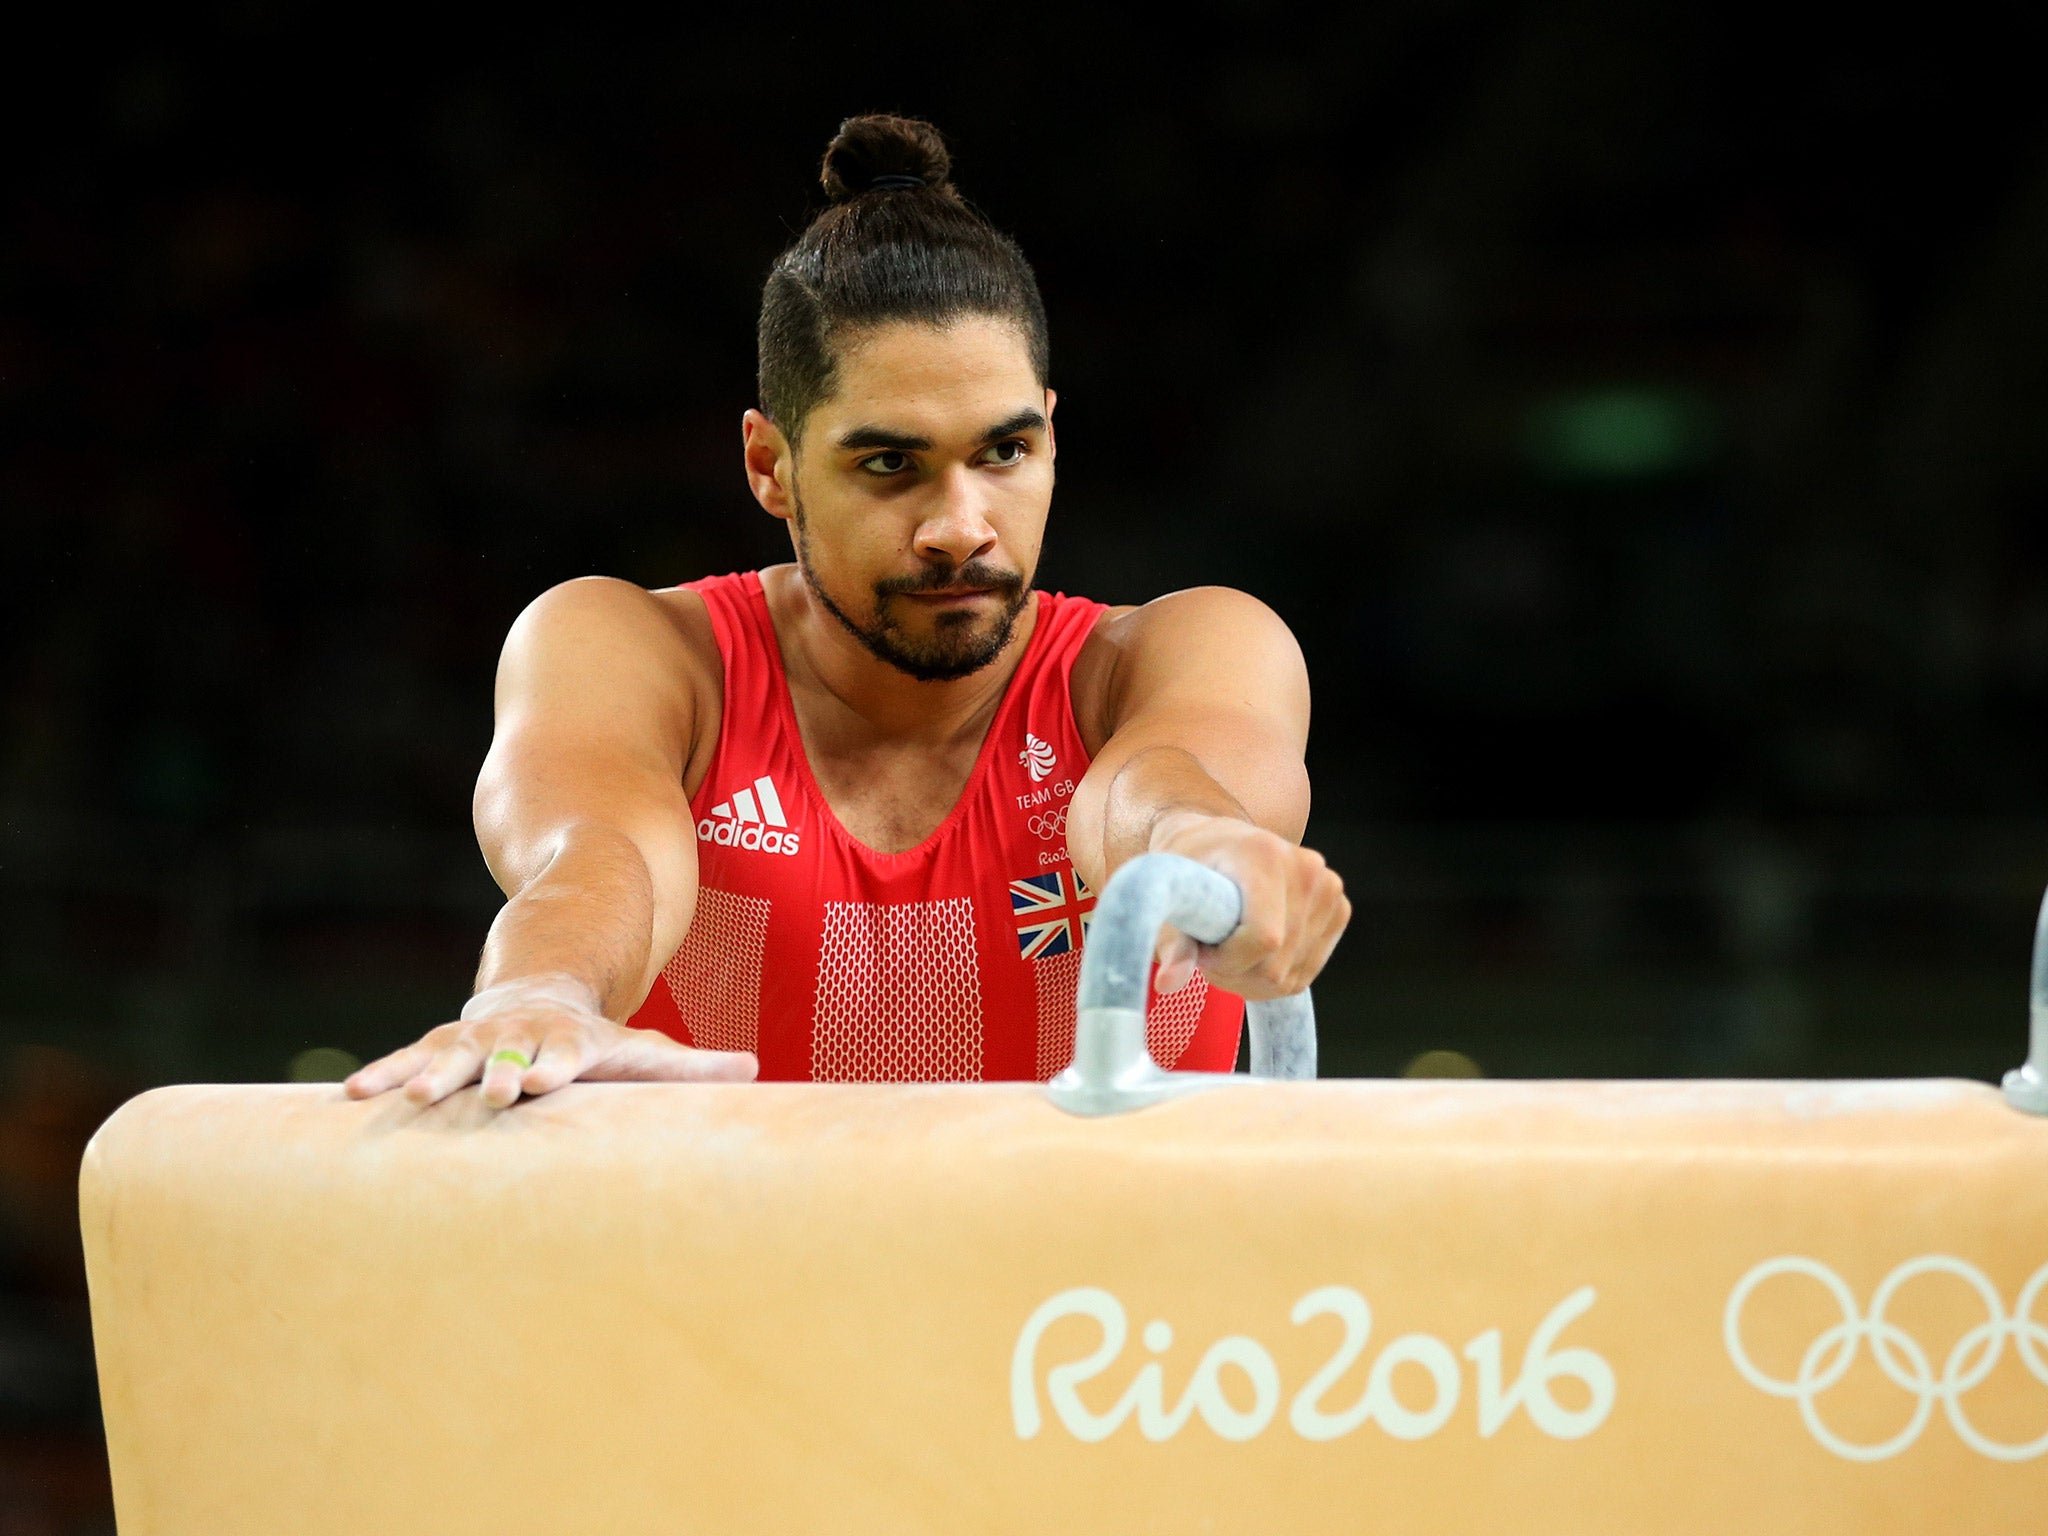 Louis Smith has been given a two-month ban from gymnastics after appearing to mock Islam in a video